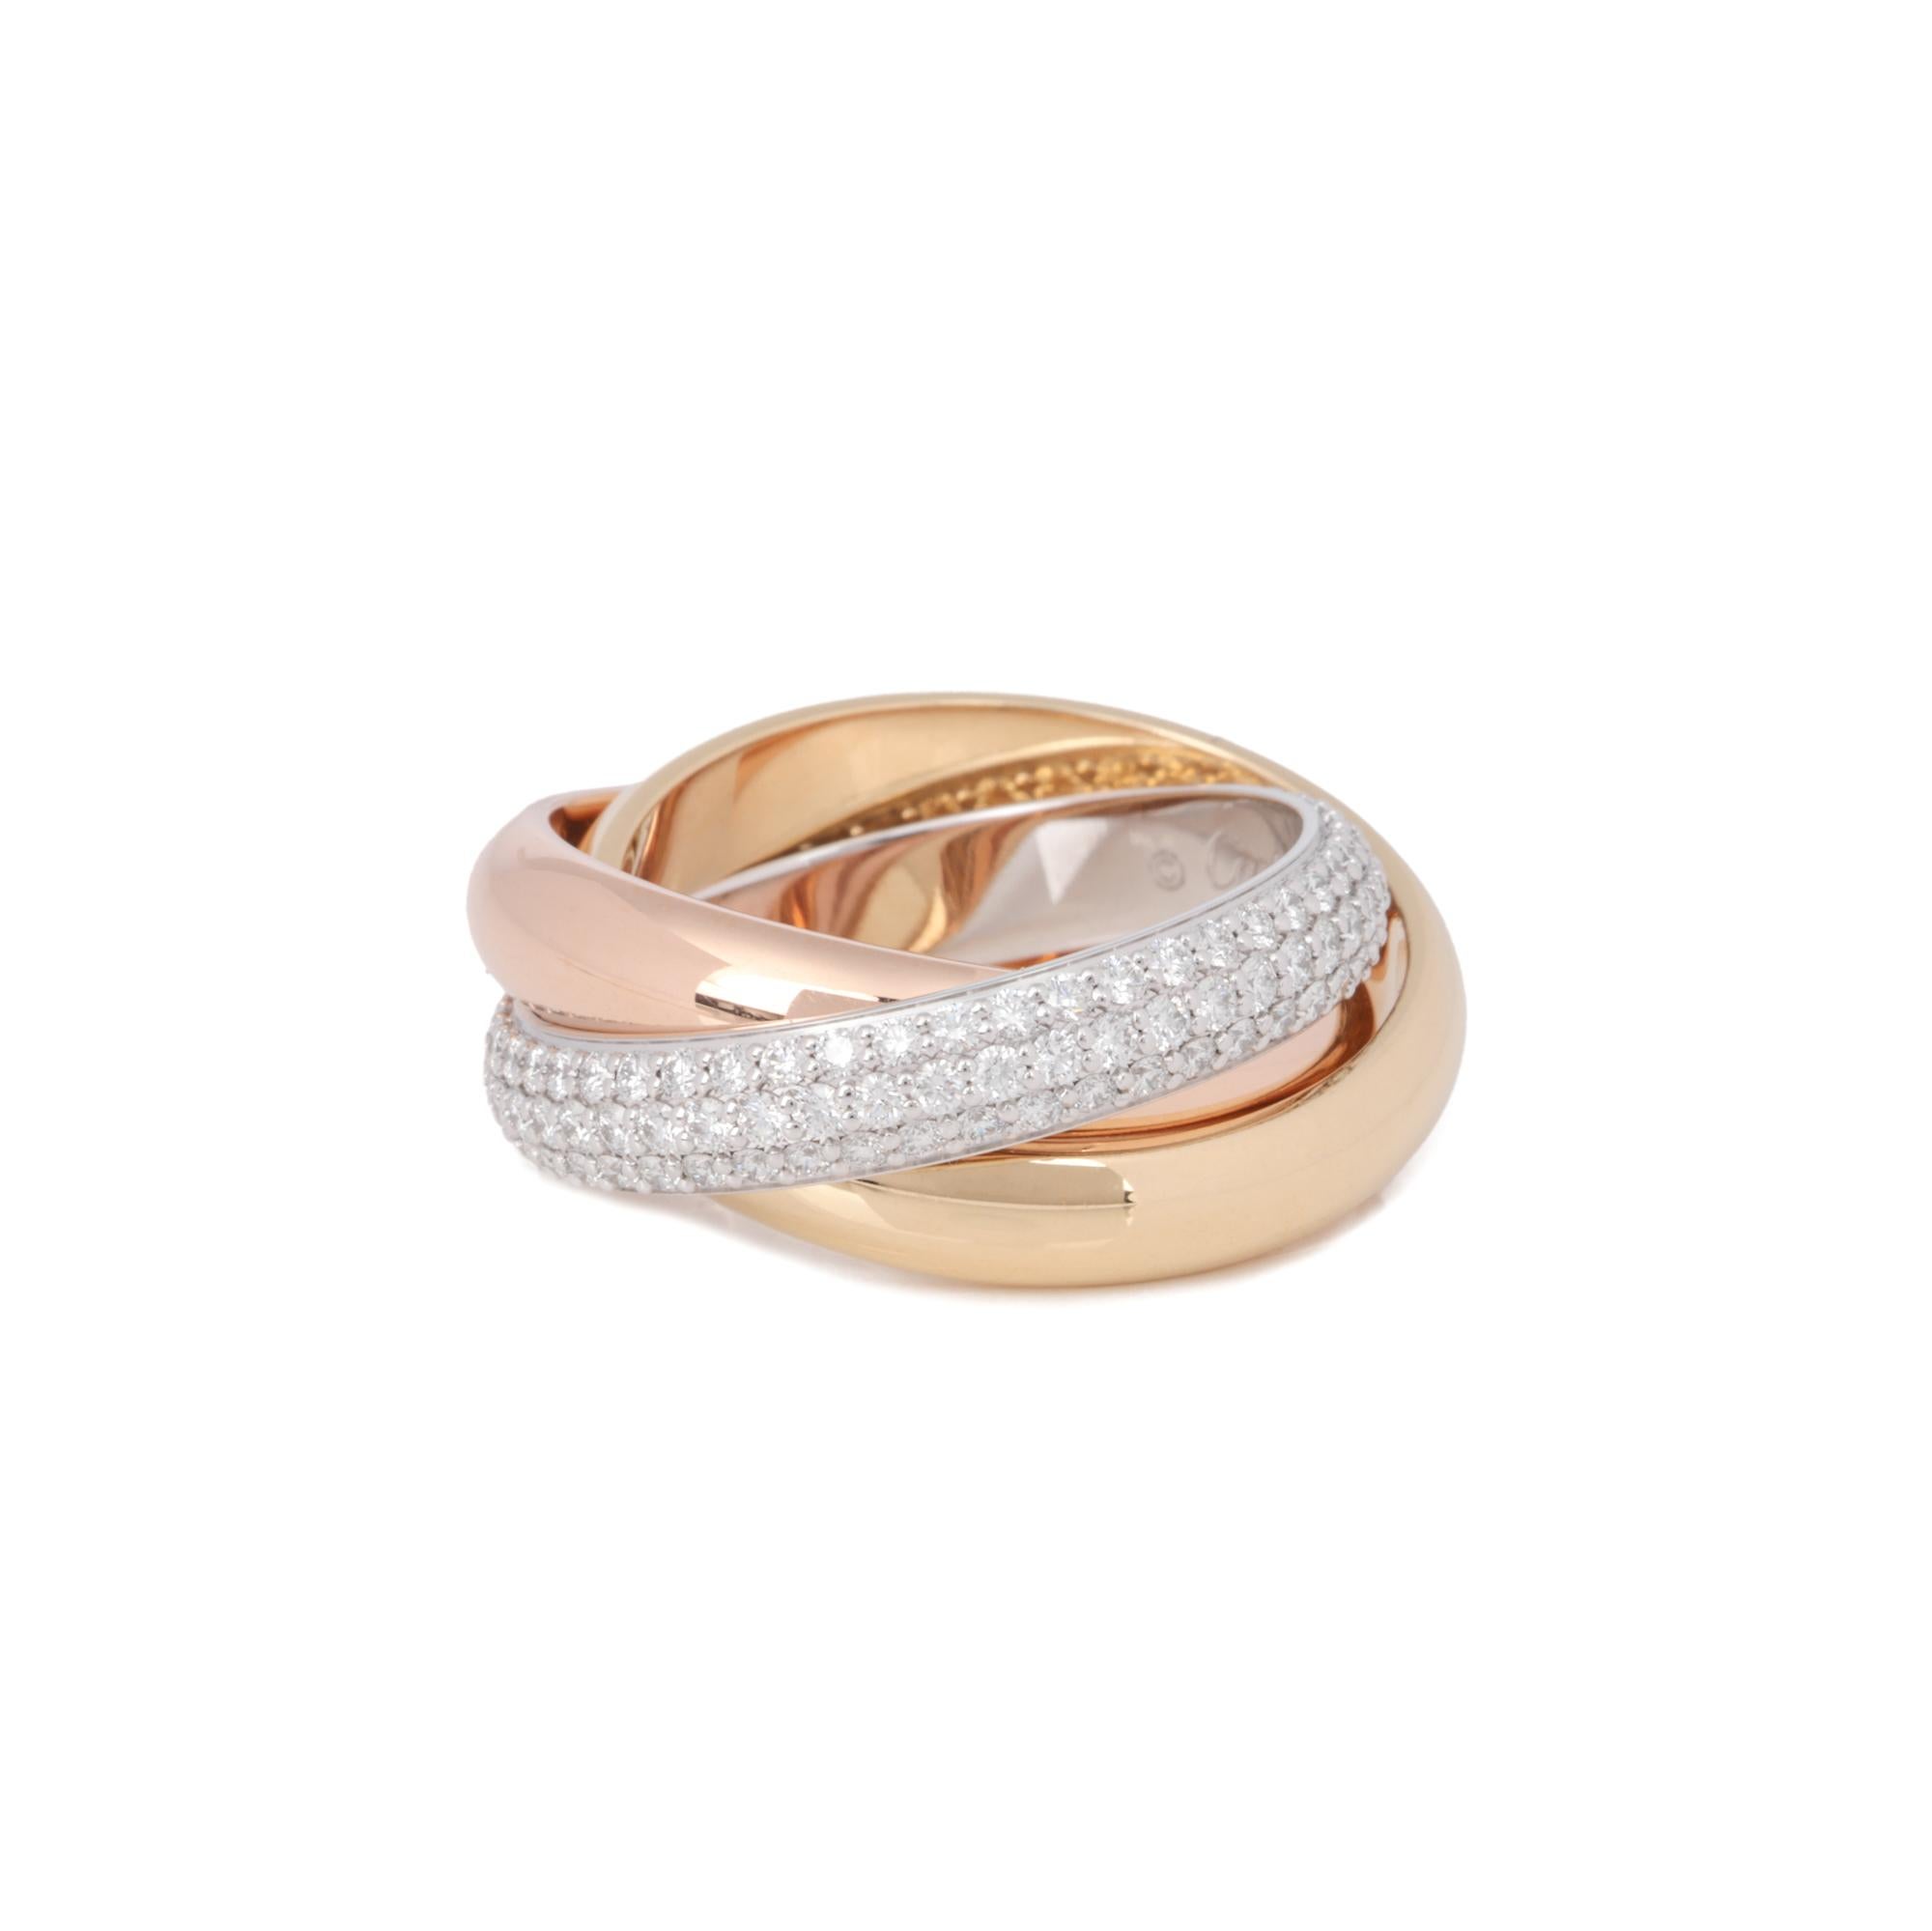 Cartier Pave Diamond 18ct White Gold, 18ct Yellow Gold And 18ct Rose Gold Trinity Ring

Brand Cartier
Model Trinity Pave Band Ring
Product Type Ring
Serial Number H*****
Accompanied By Cartier Box, Service Papers
Material(s) 18ct White Gold, 18ct